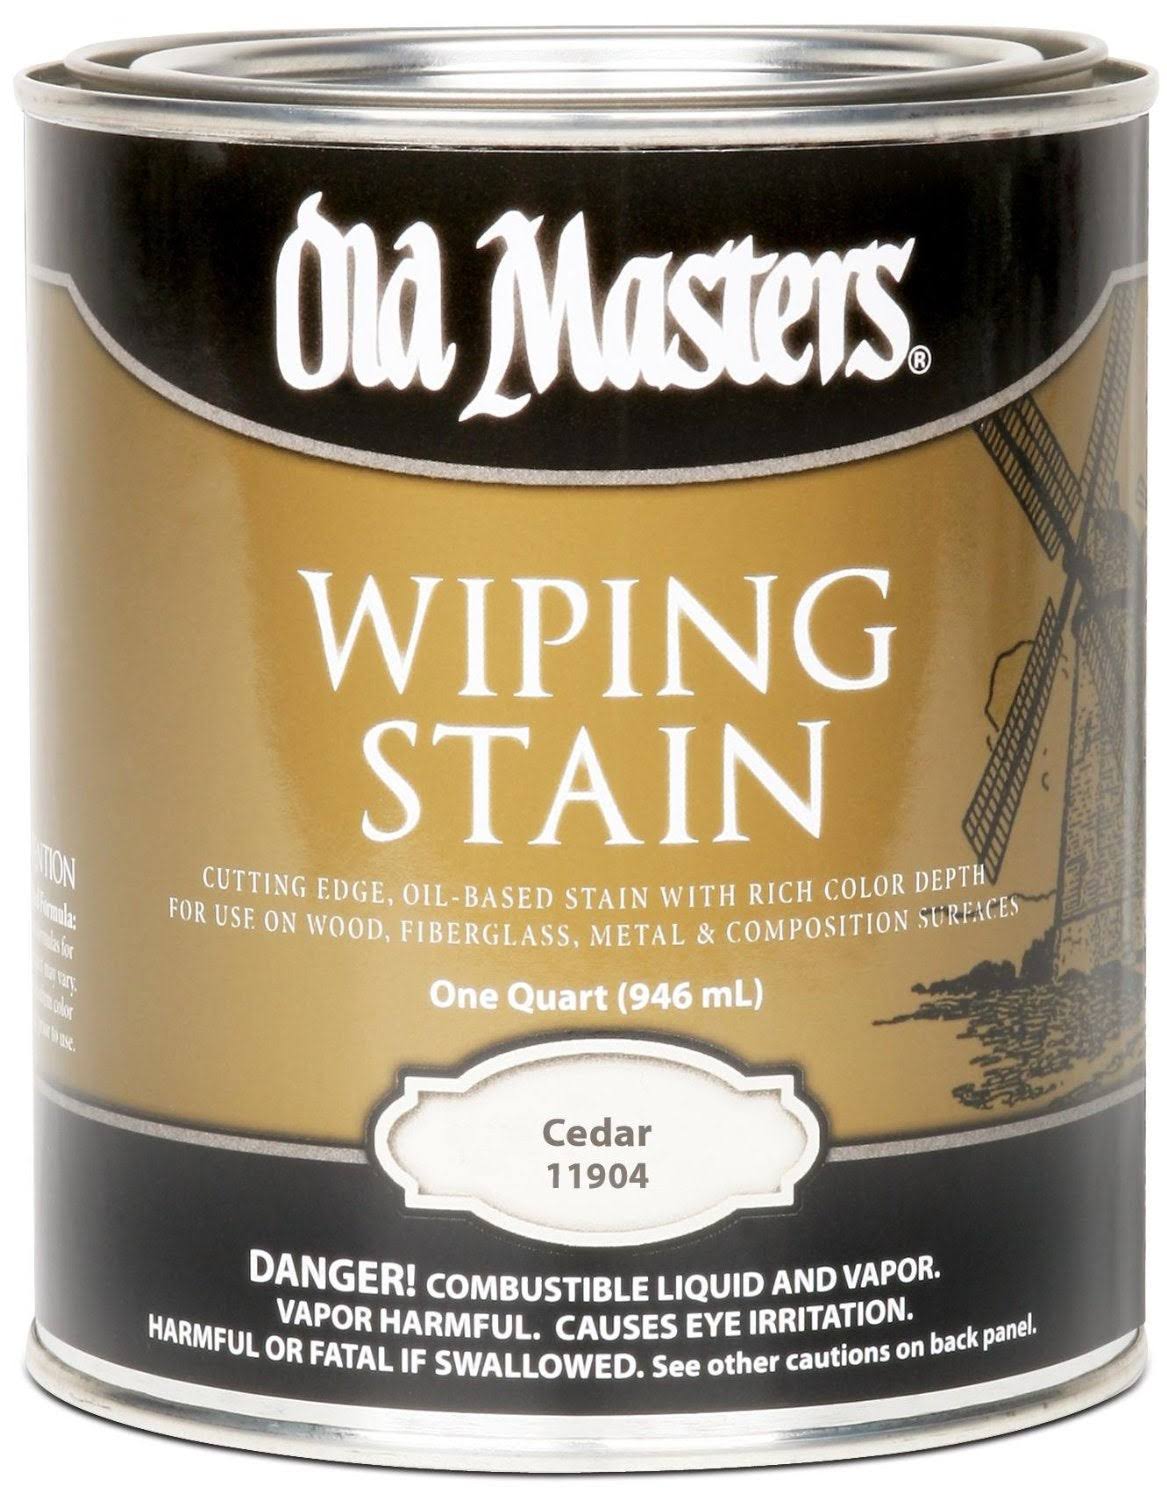 Old Masters Wiping Wood Stain - Cedar, 1 Quart